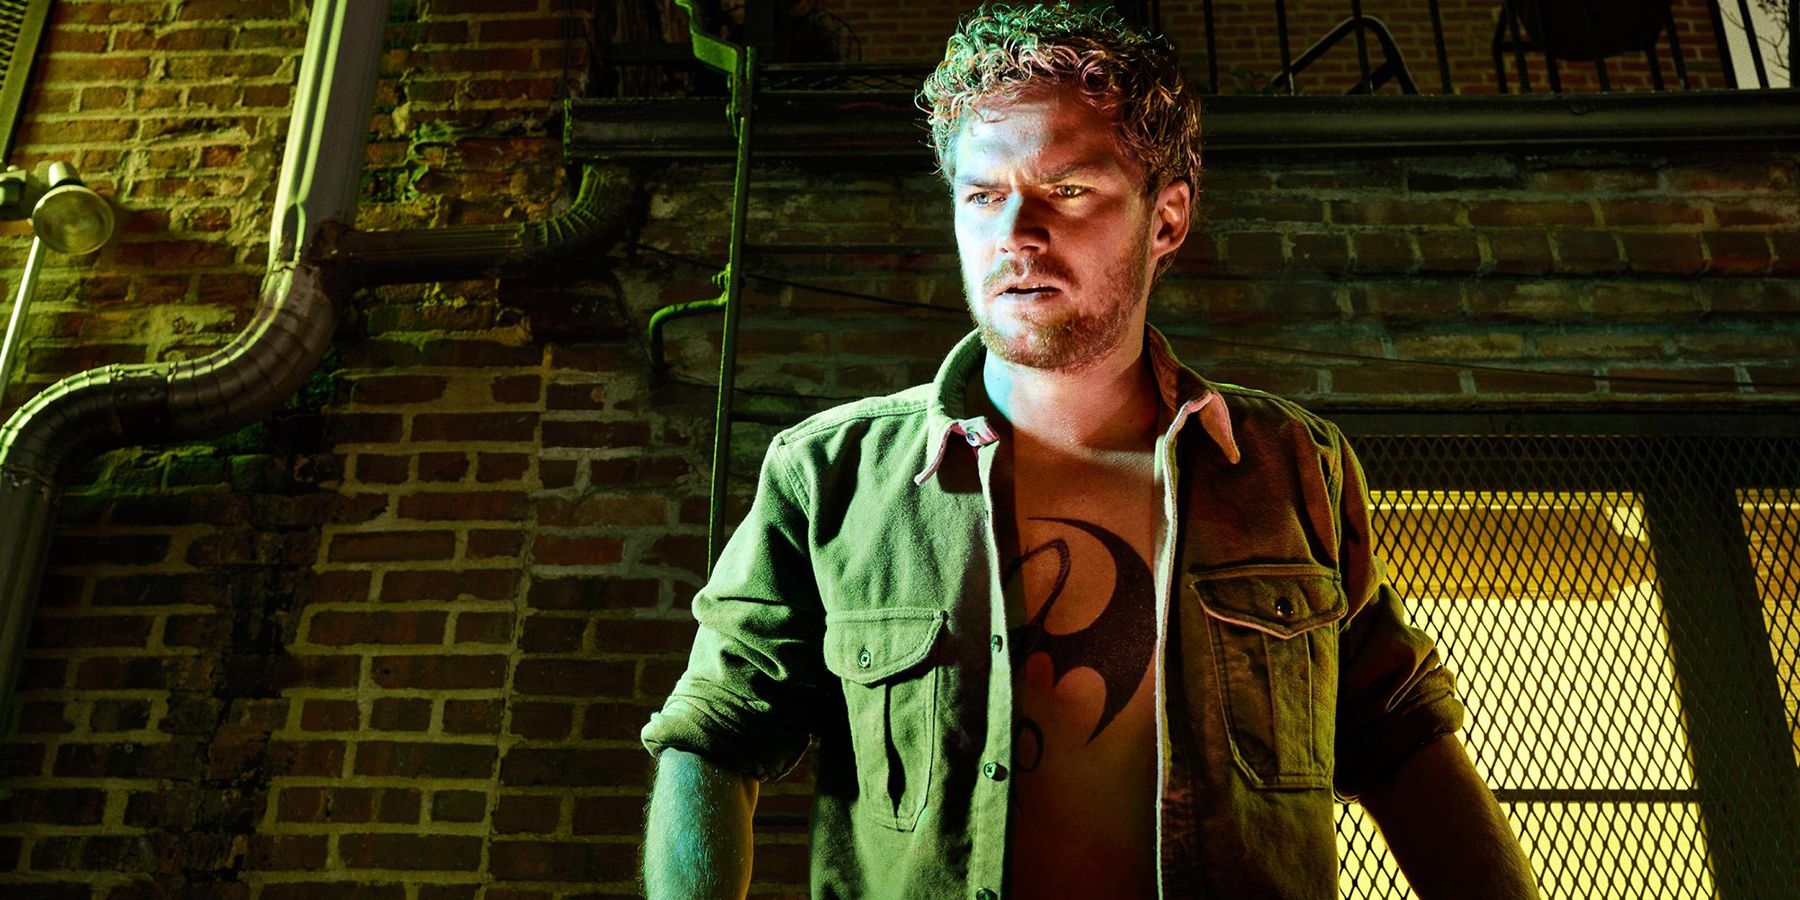 Danny Rand from the Iron Fist series stands outside his building.